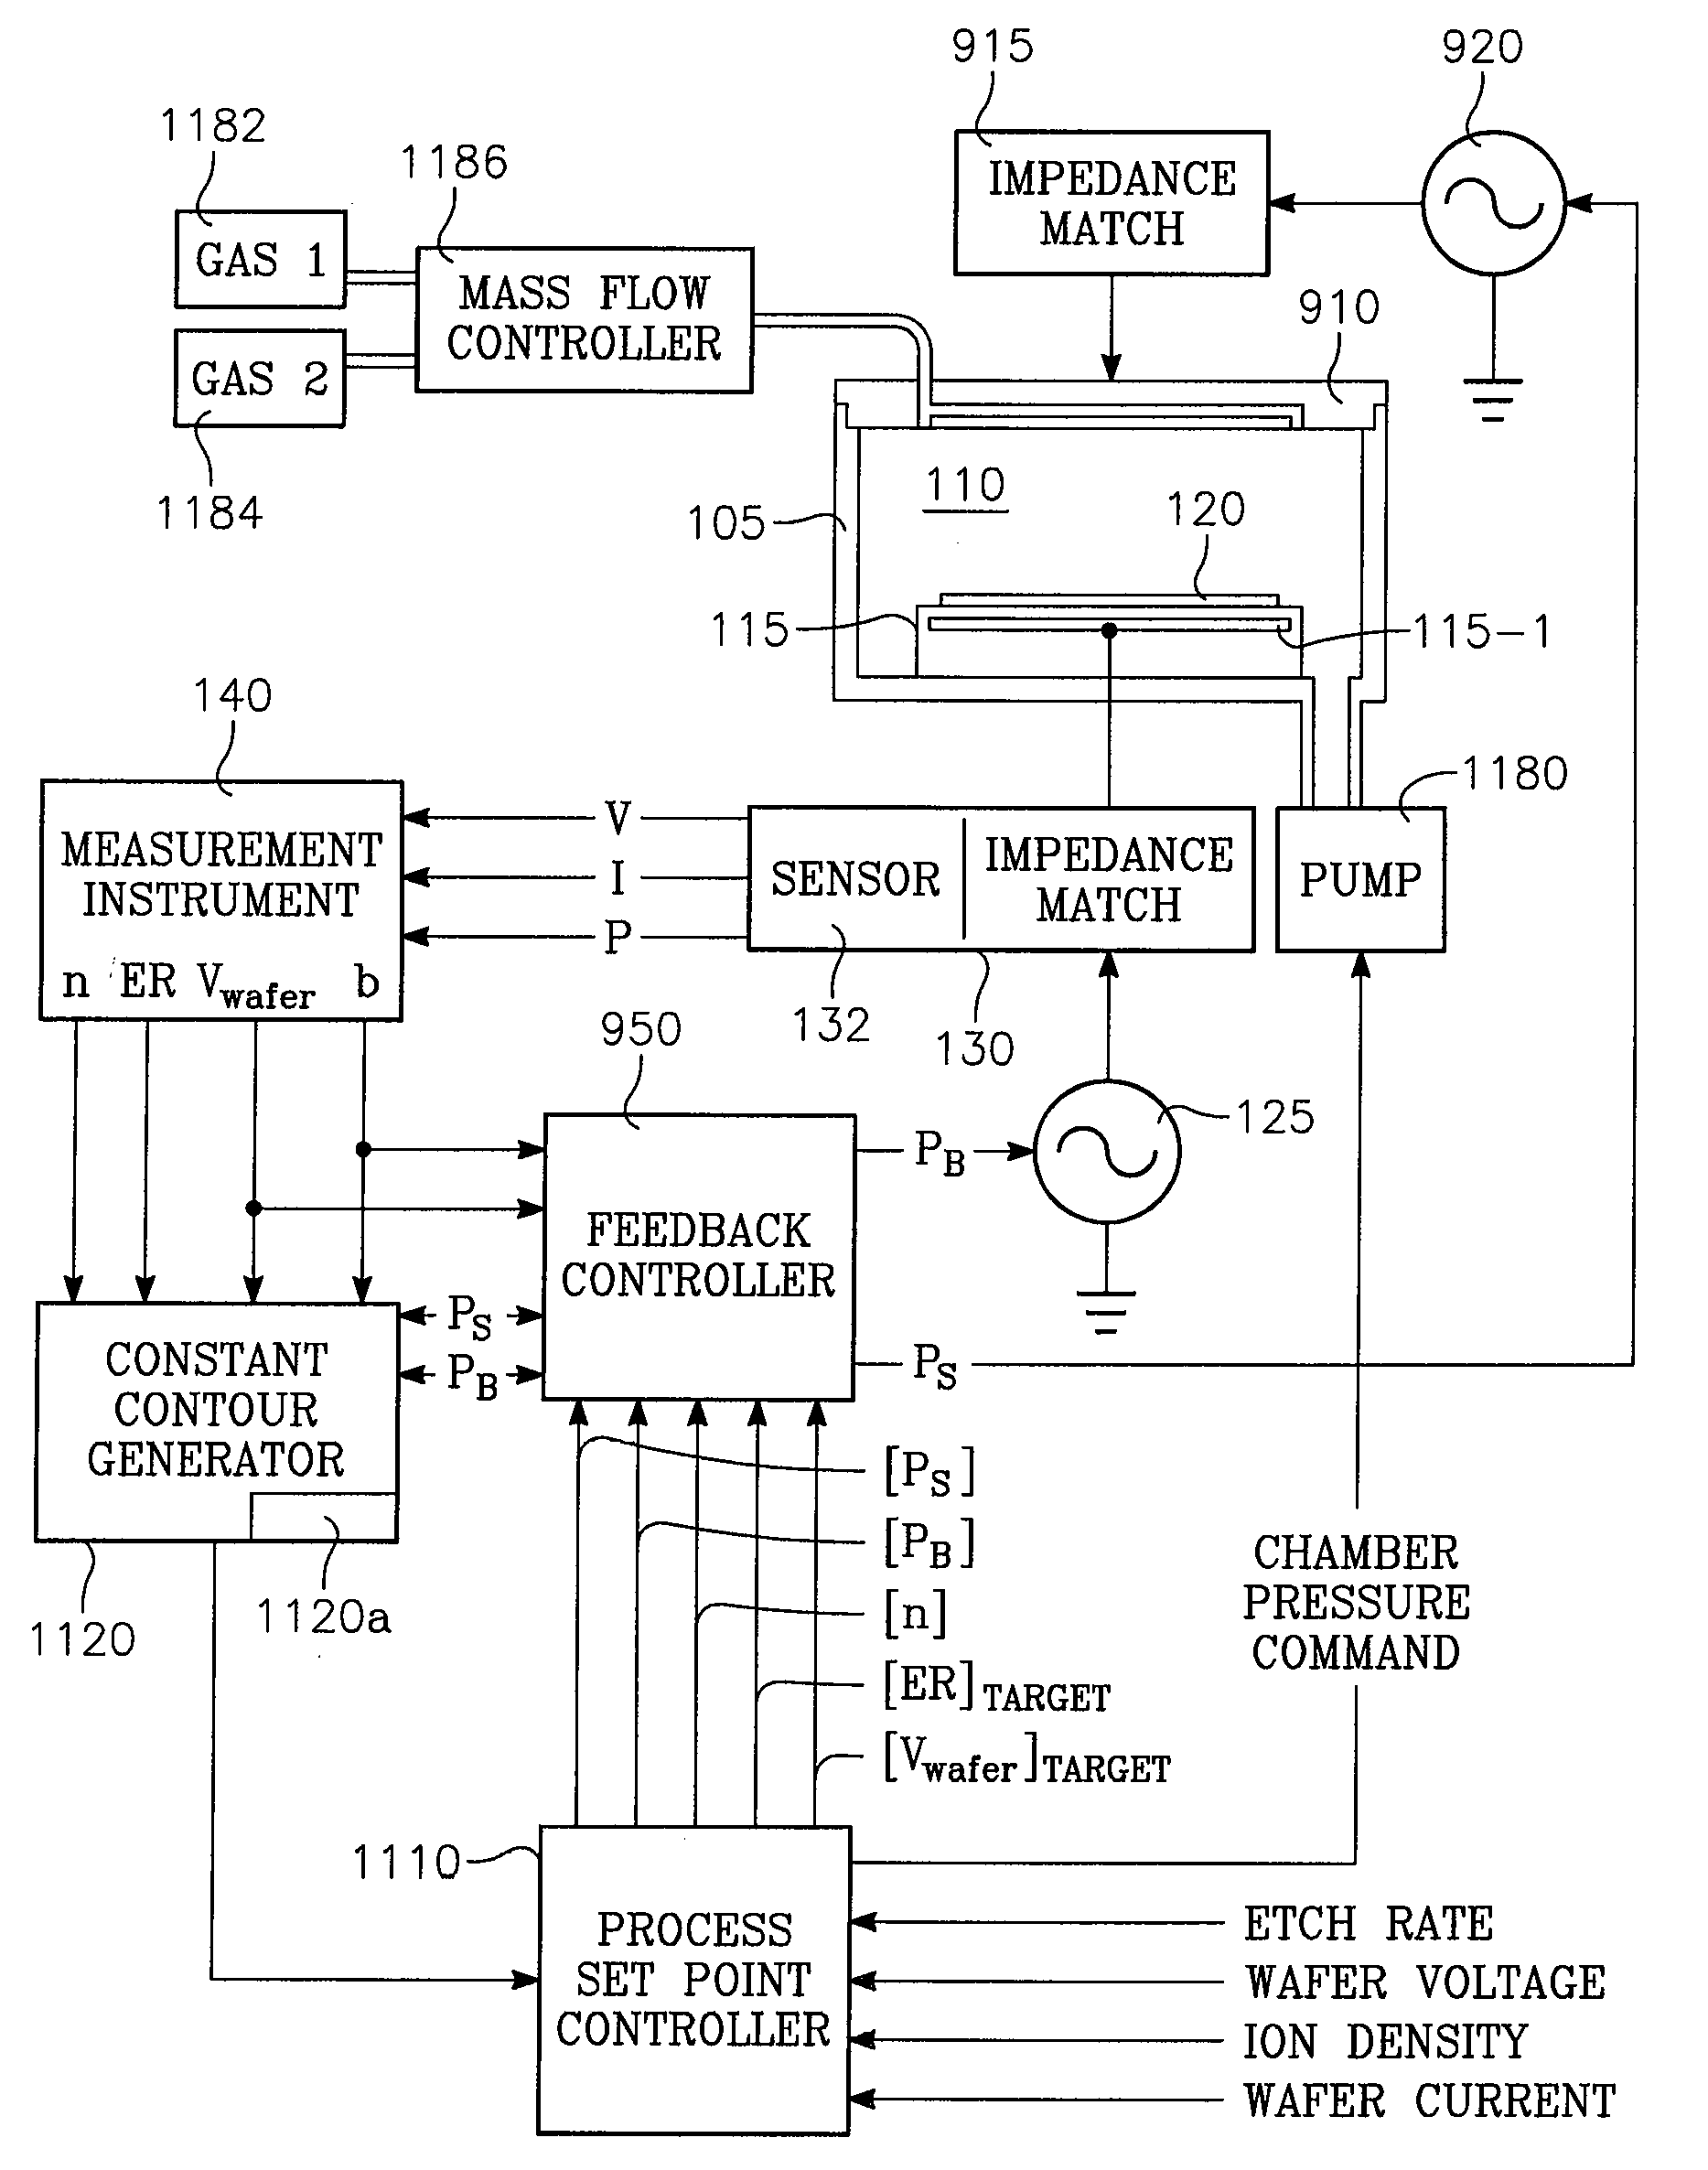 Method of characterizing a chamber based upon concurrent behavior of selected plasma parameters as a function of source power, bias power and chamber pressure